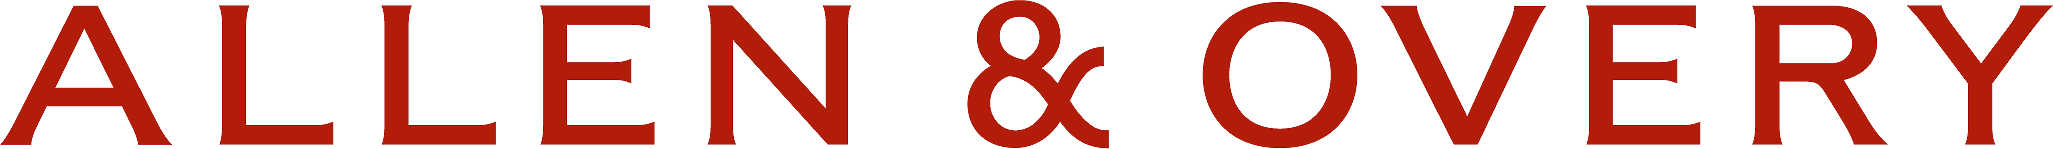 Allen and Overy logo